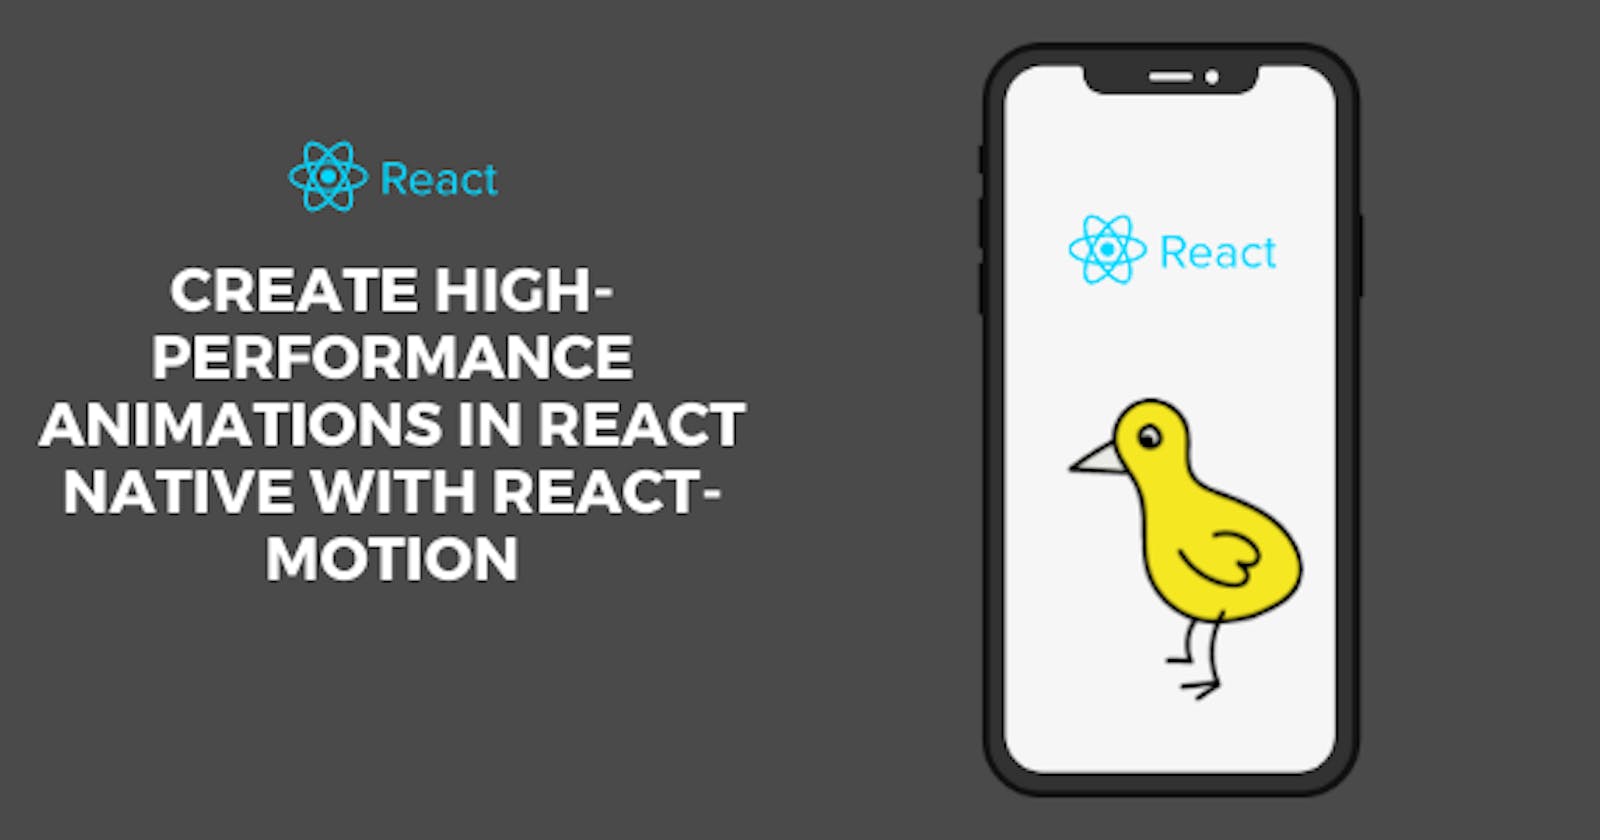 Create high-performance animations in React Native with react-motion